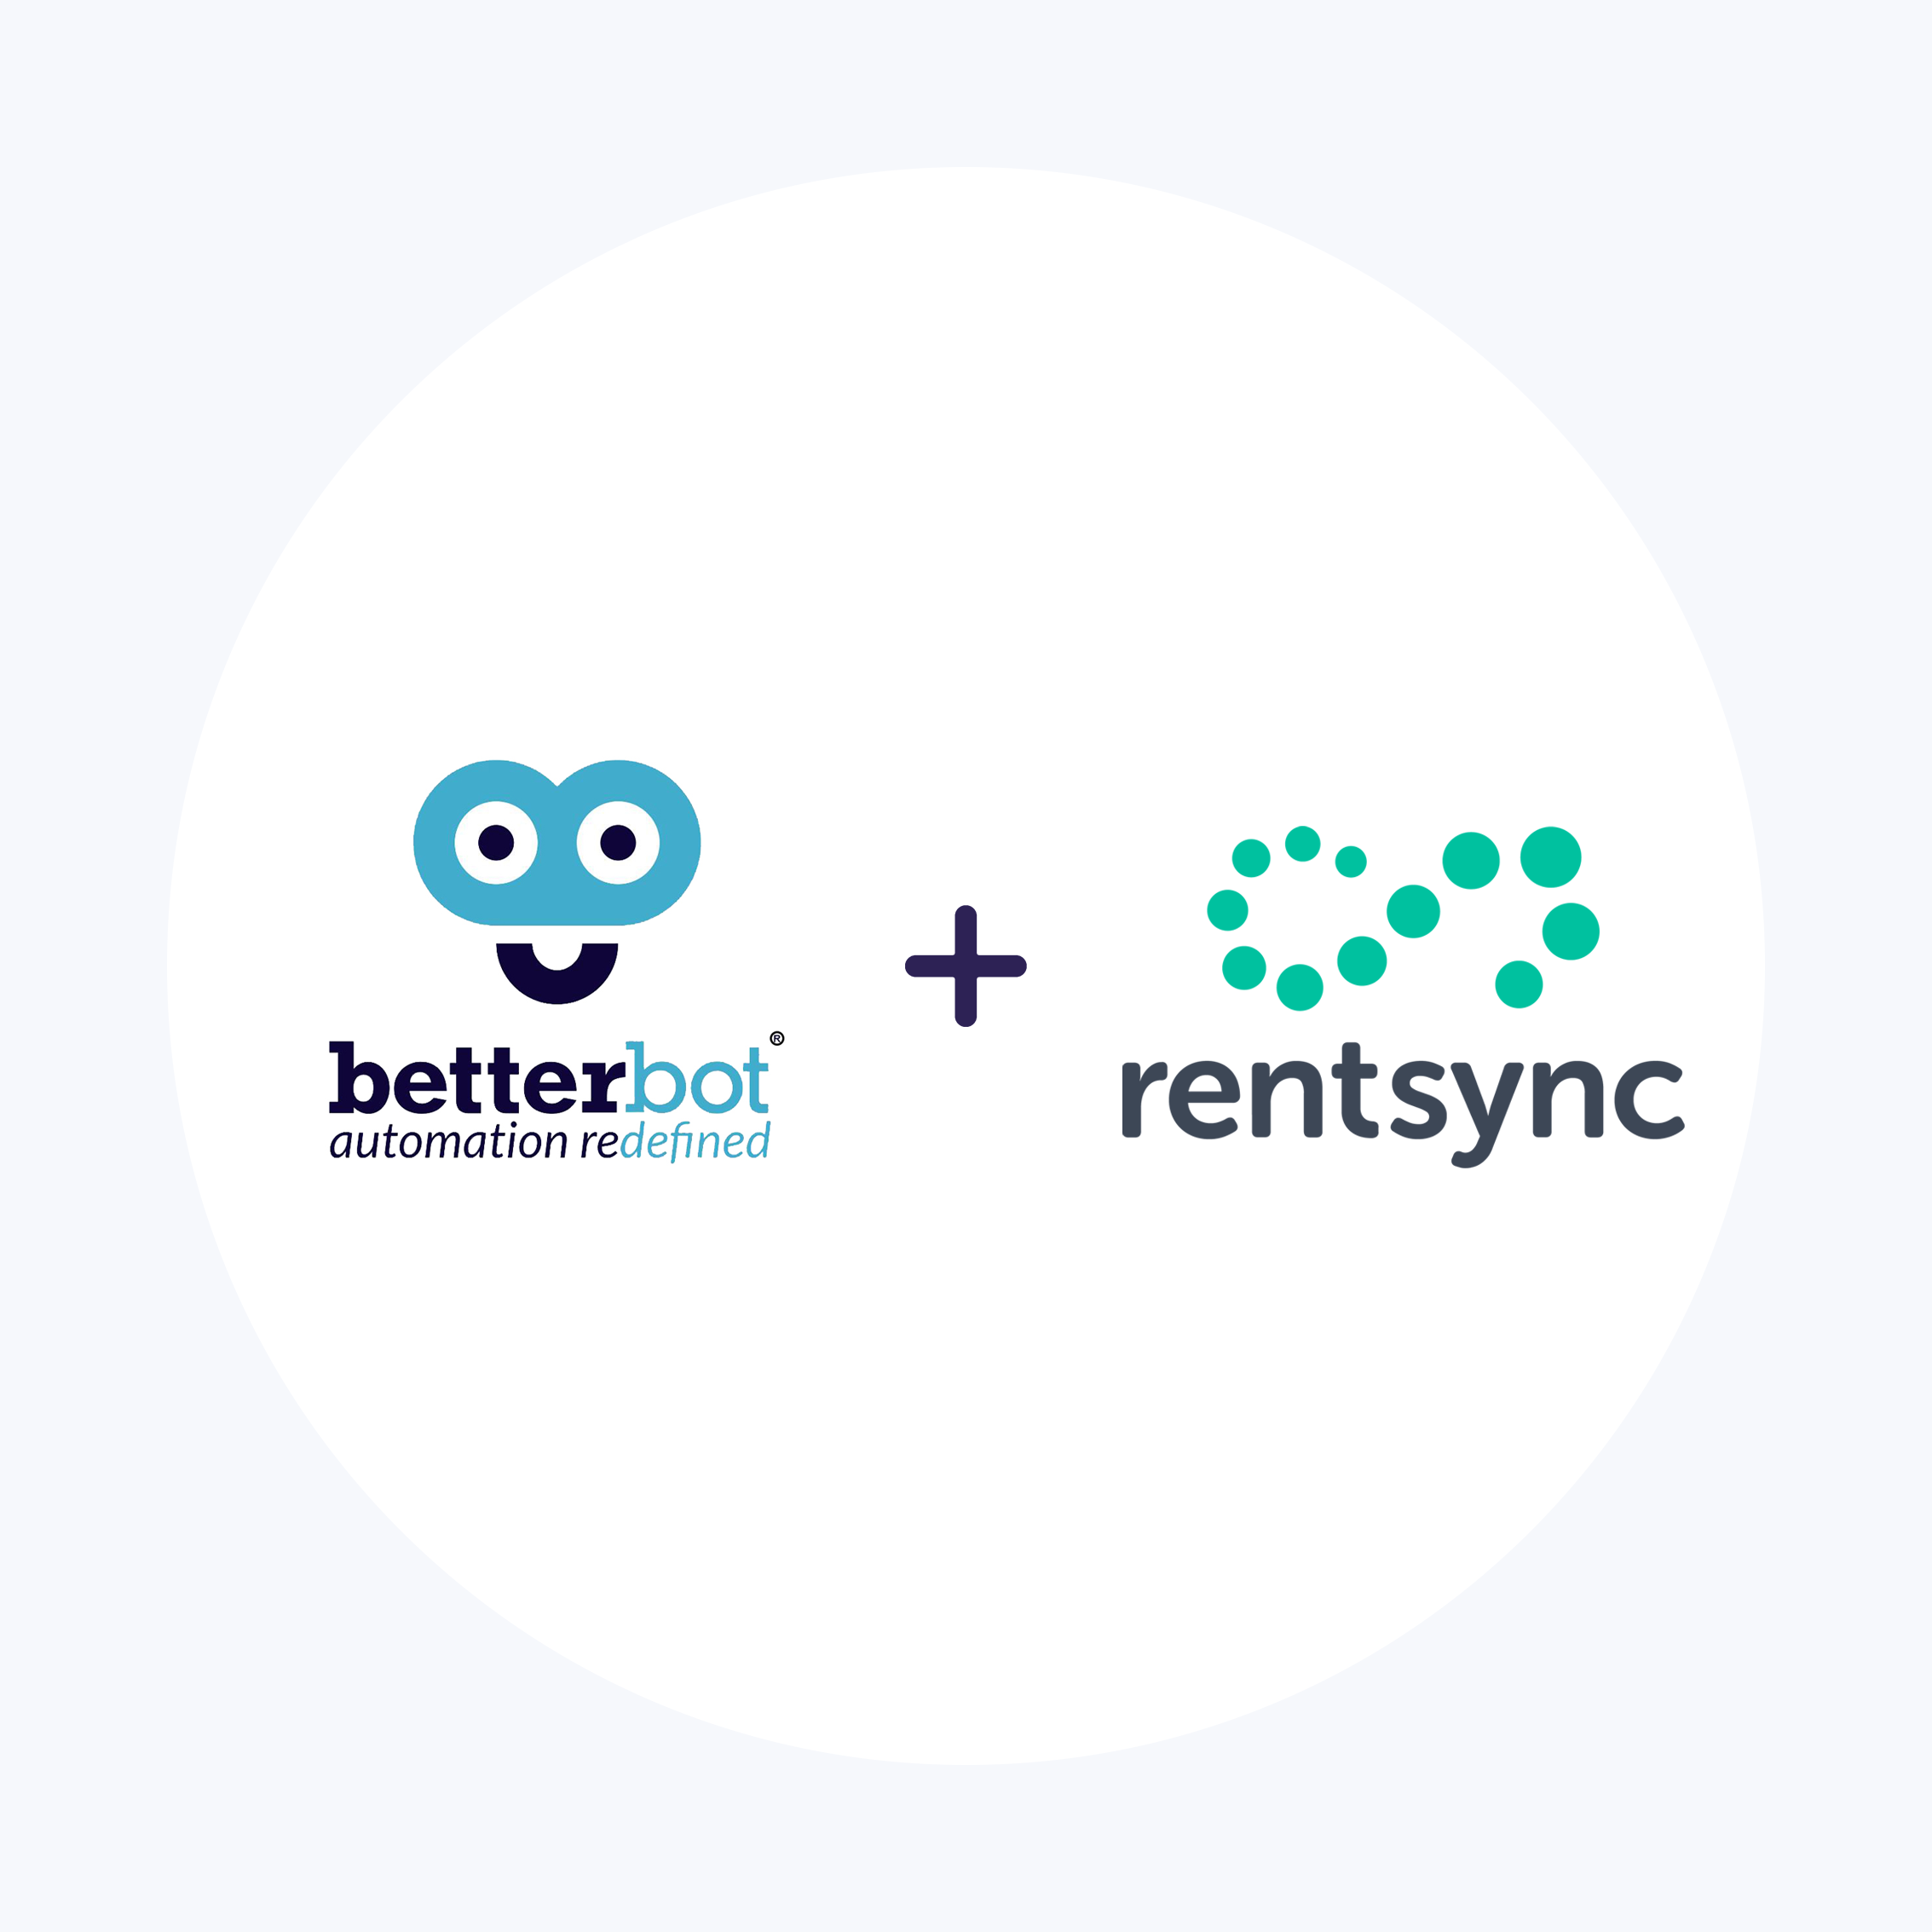 BetterBot and Rentsync logos